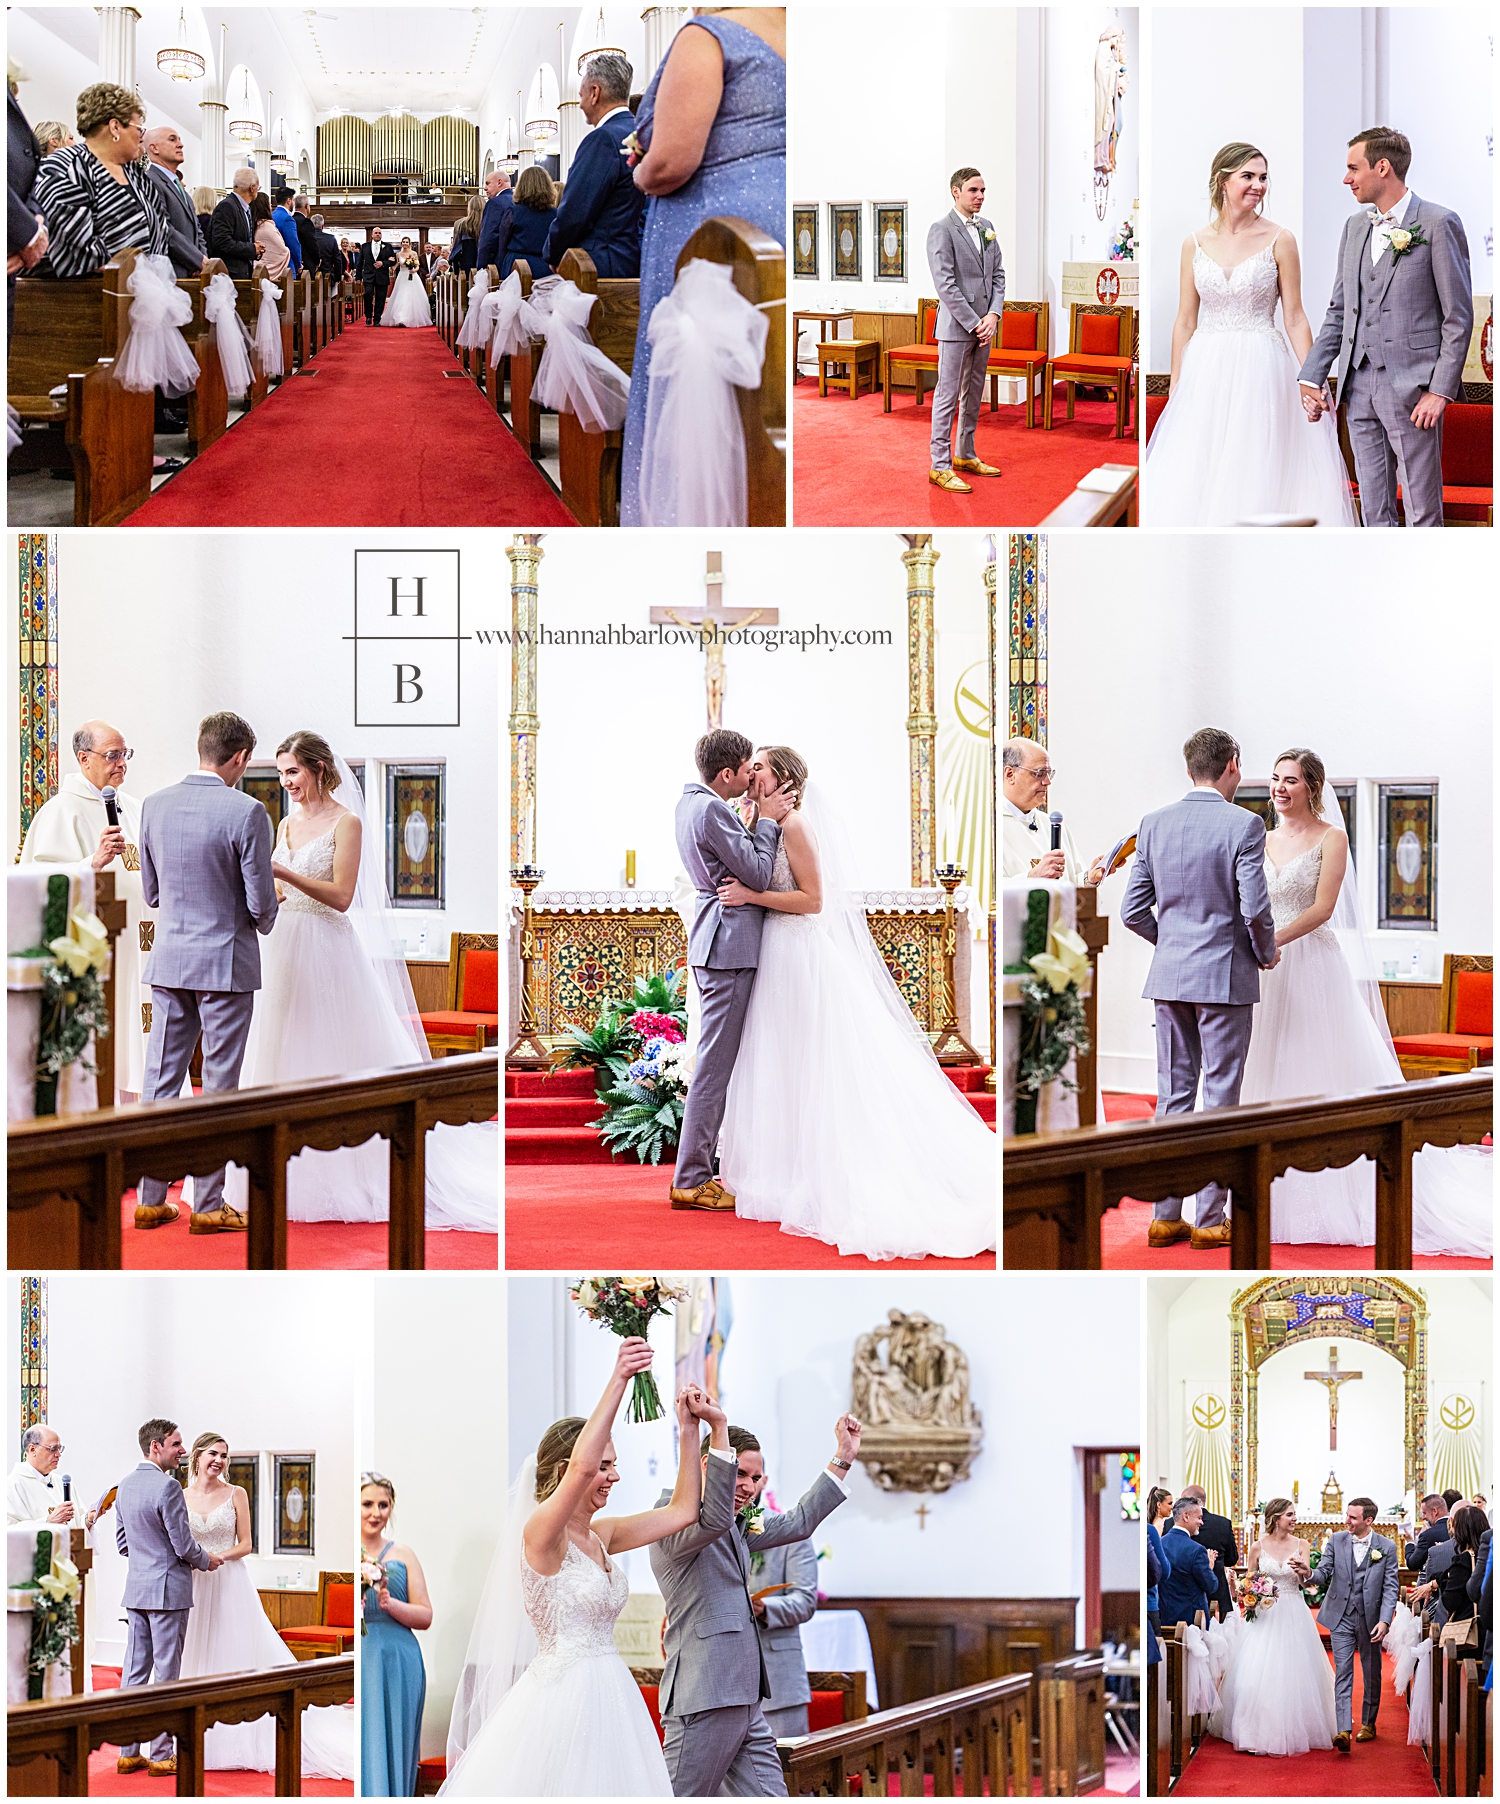 Collage of Catholic wedding ceremony in Butler, PA.